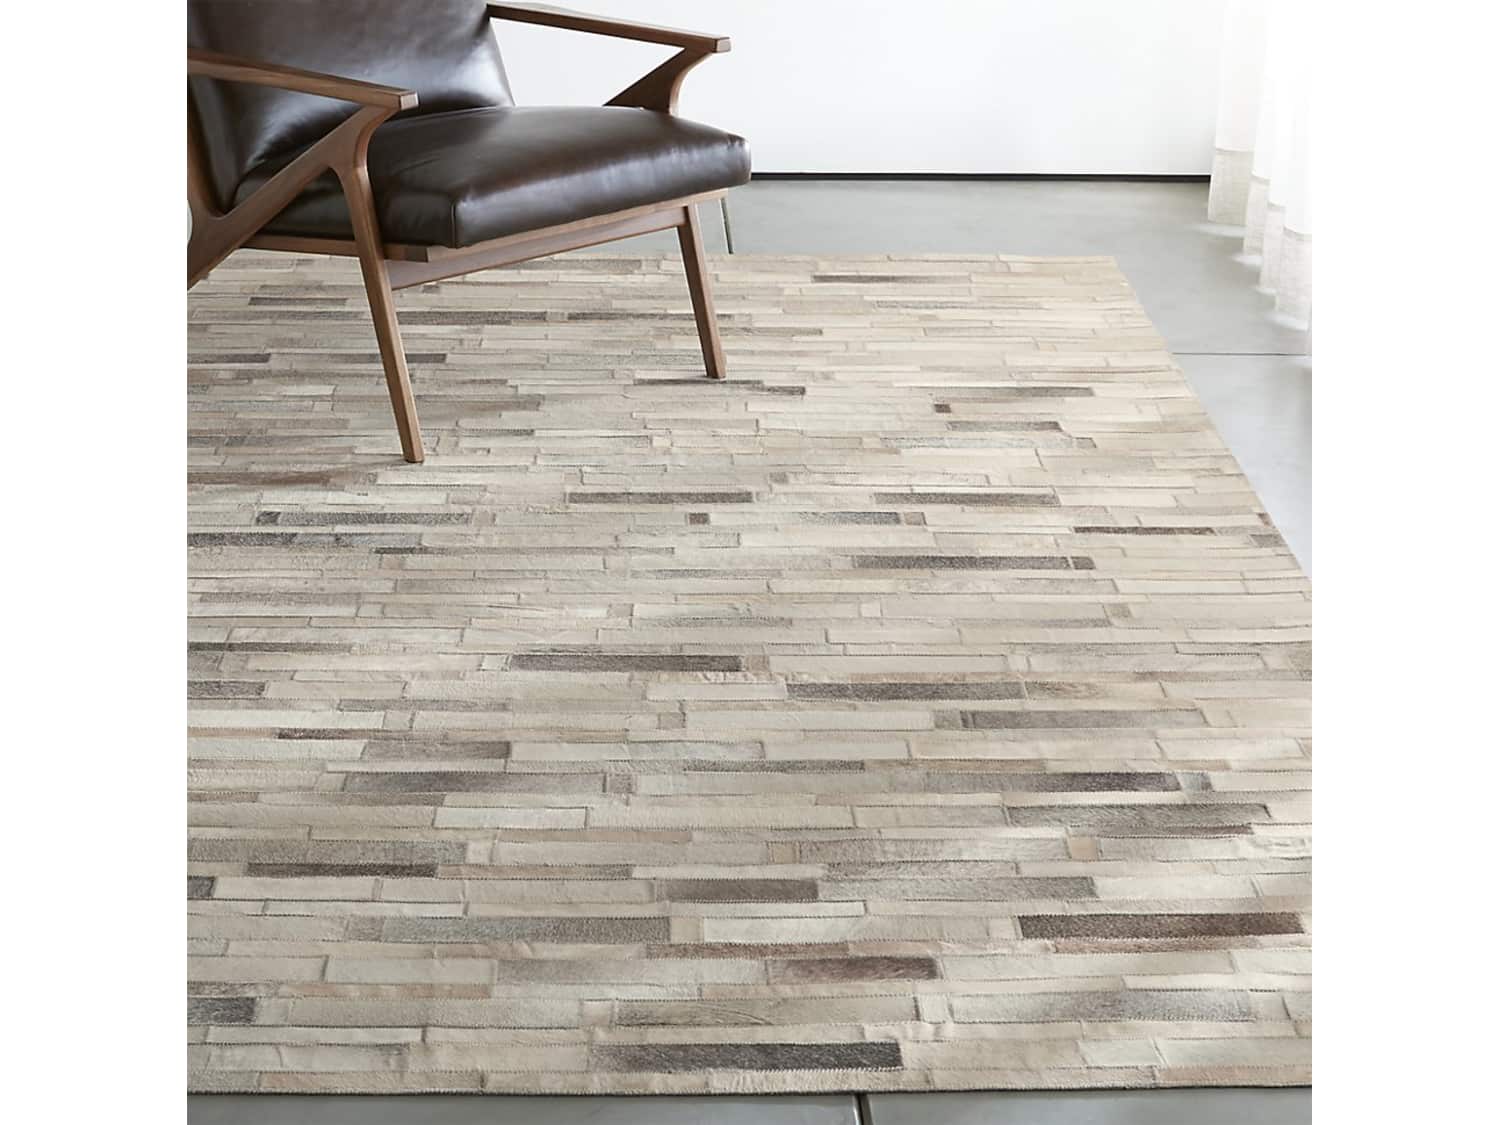 Crate Barrel Ewing Striped Cowhide Rug 8 X10 Apartment